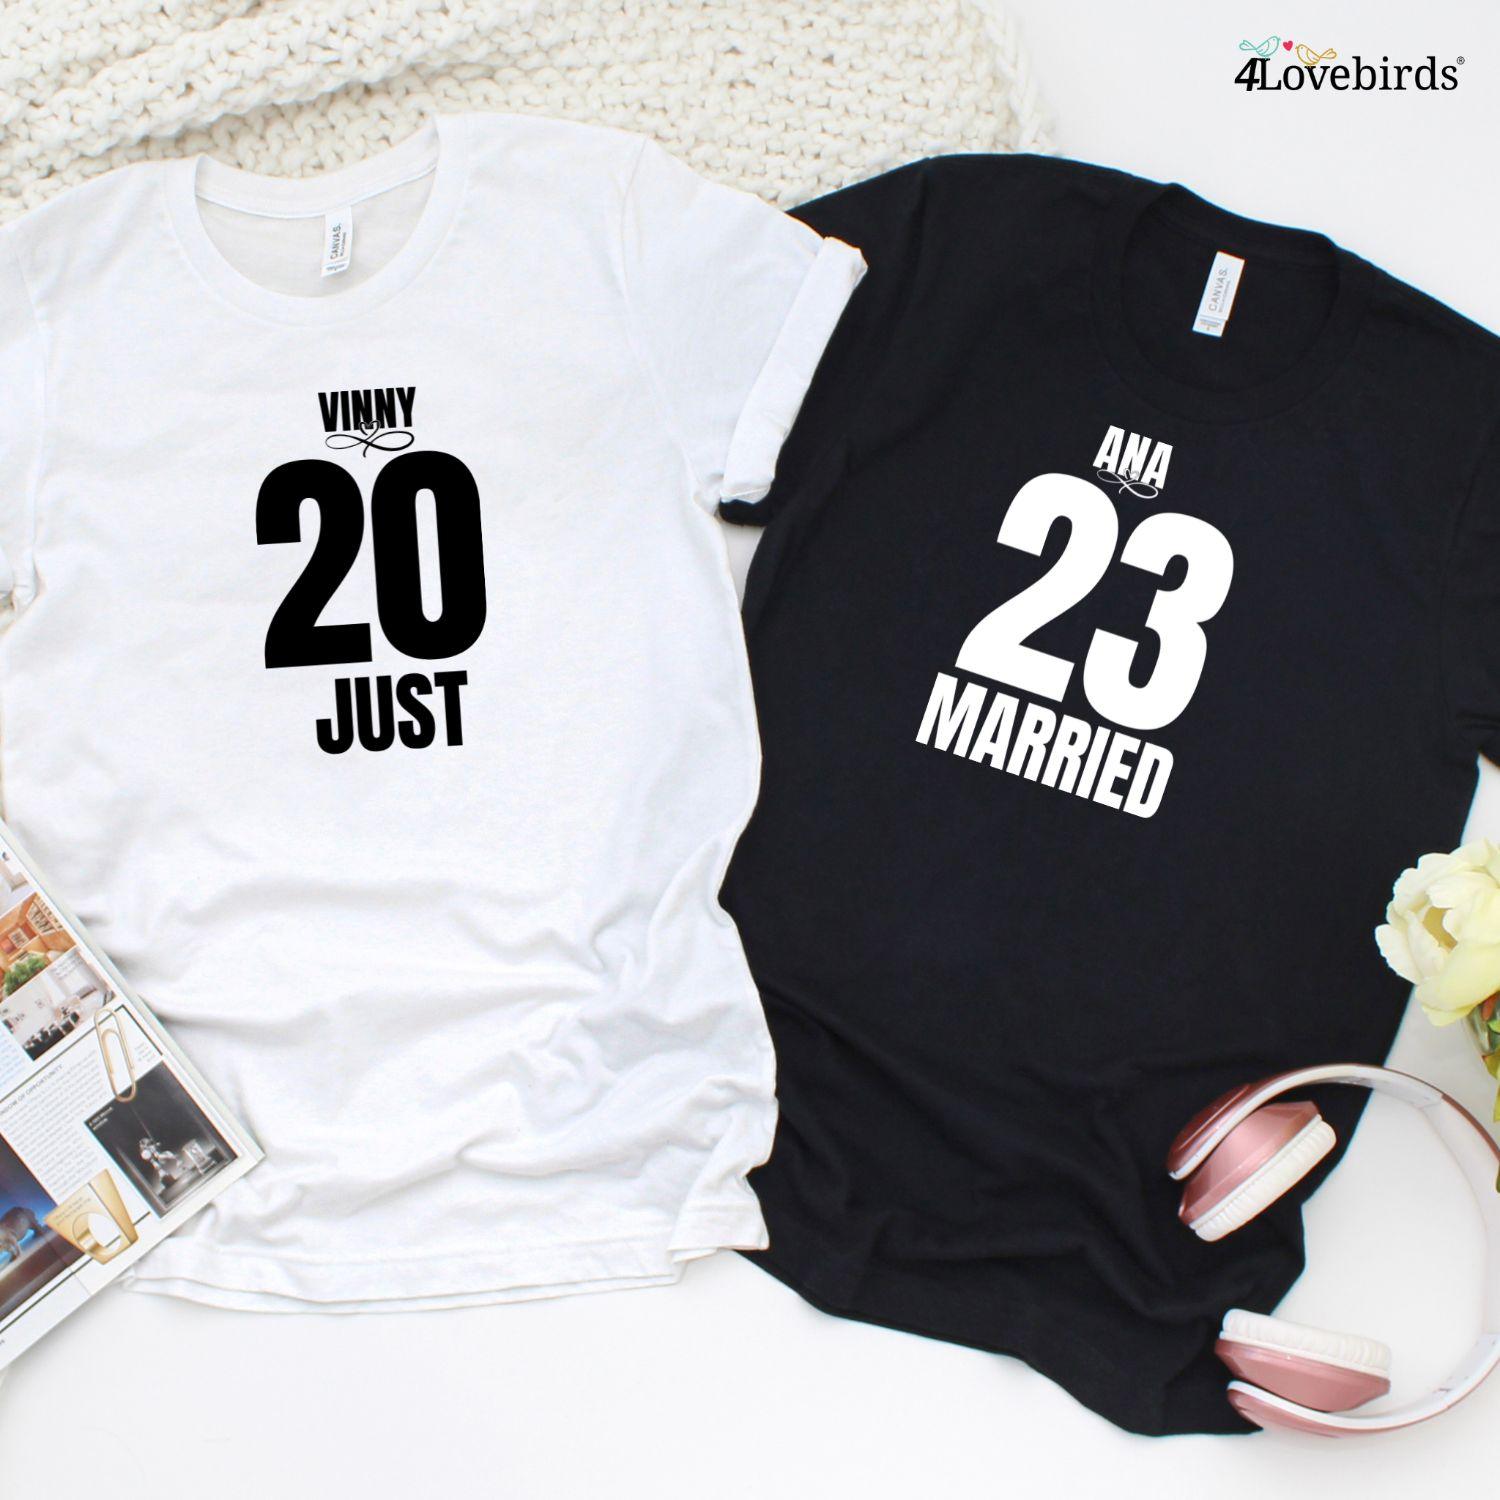 Just Married [Name & Year]: Custom Matching Set for Couples' Celebration Outfits - 4Lovebirds